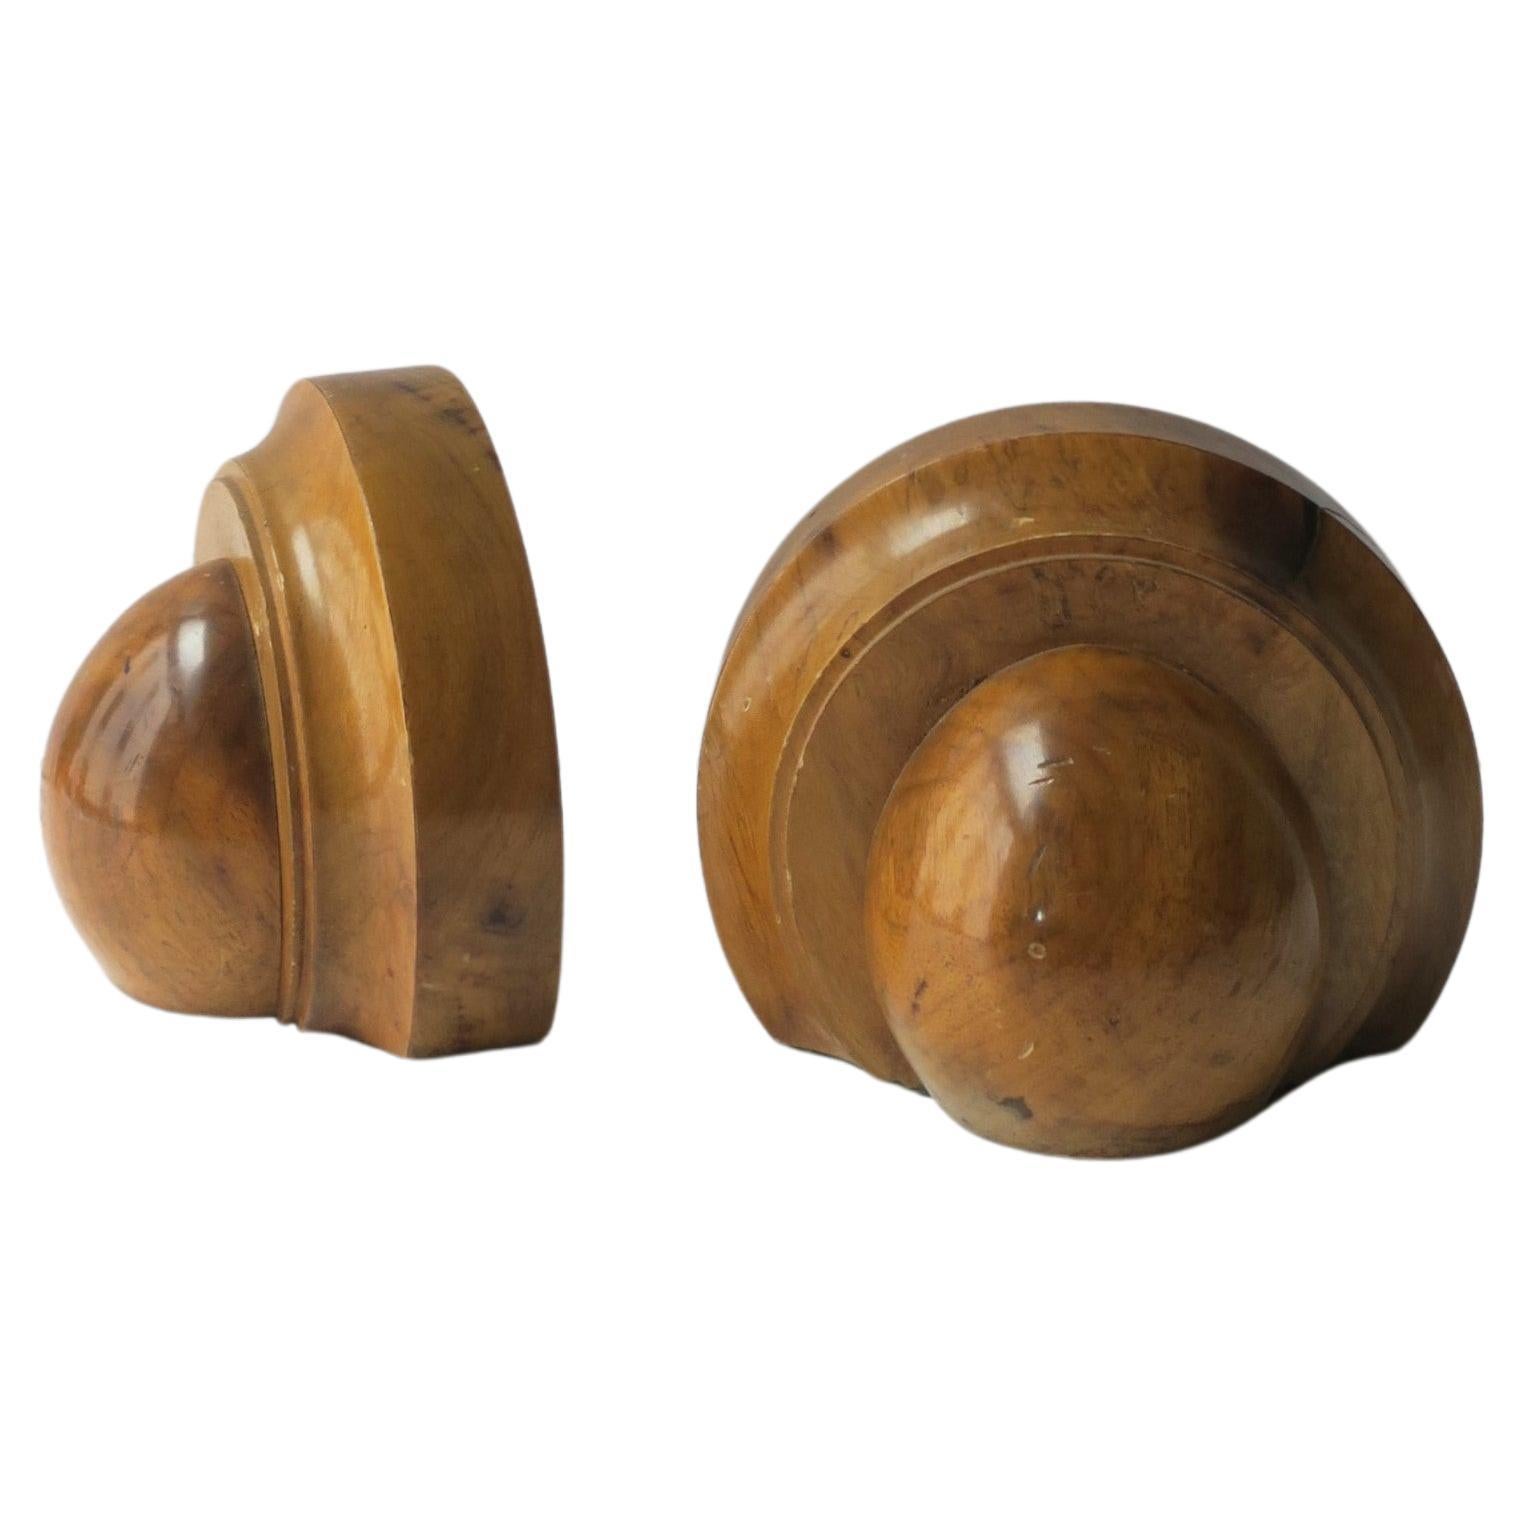 Art Deco Birdseye Maple Wood Bookends, Pair For Sale